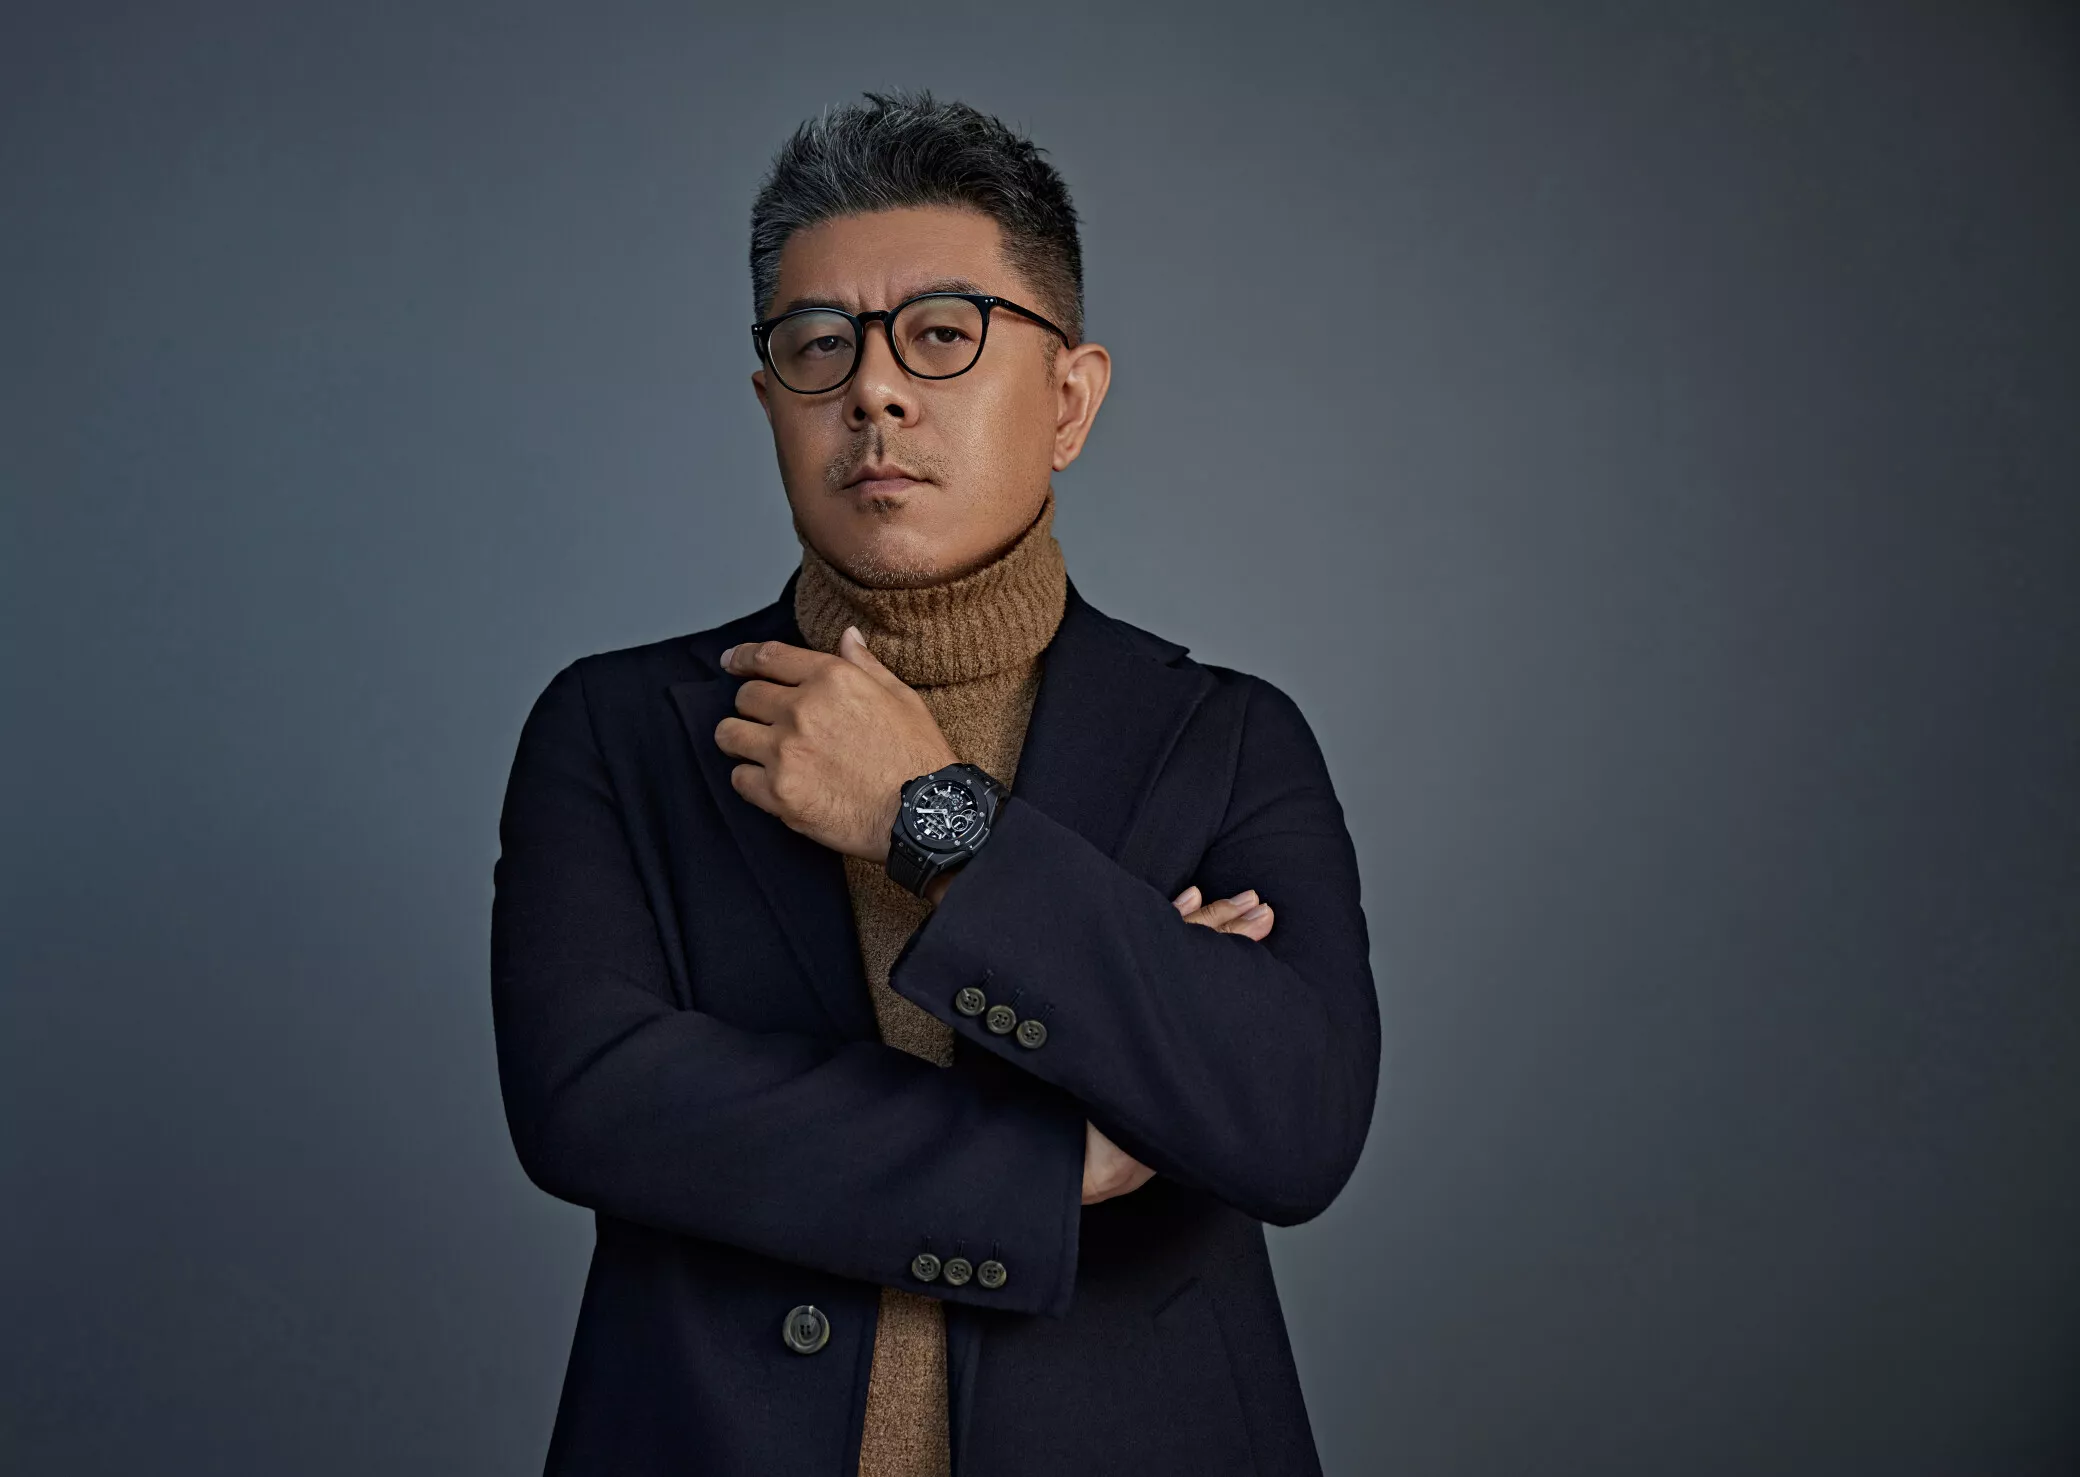 Architect MA Yansong is Hublot’s new friend of the brand